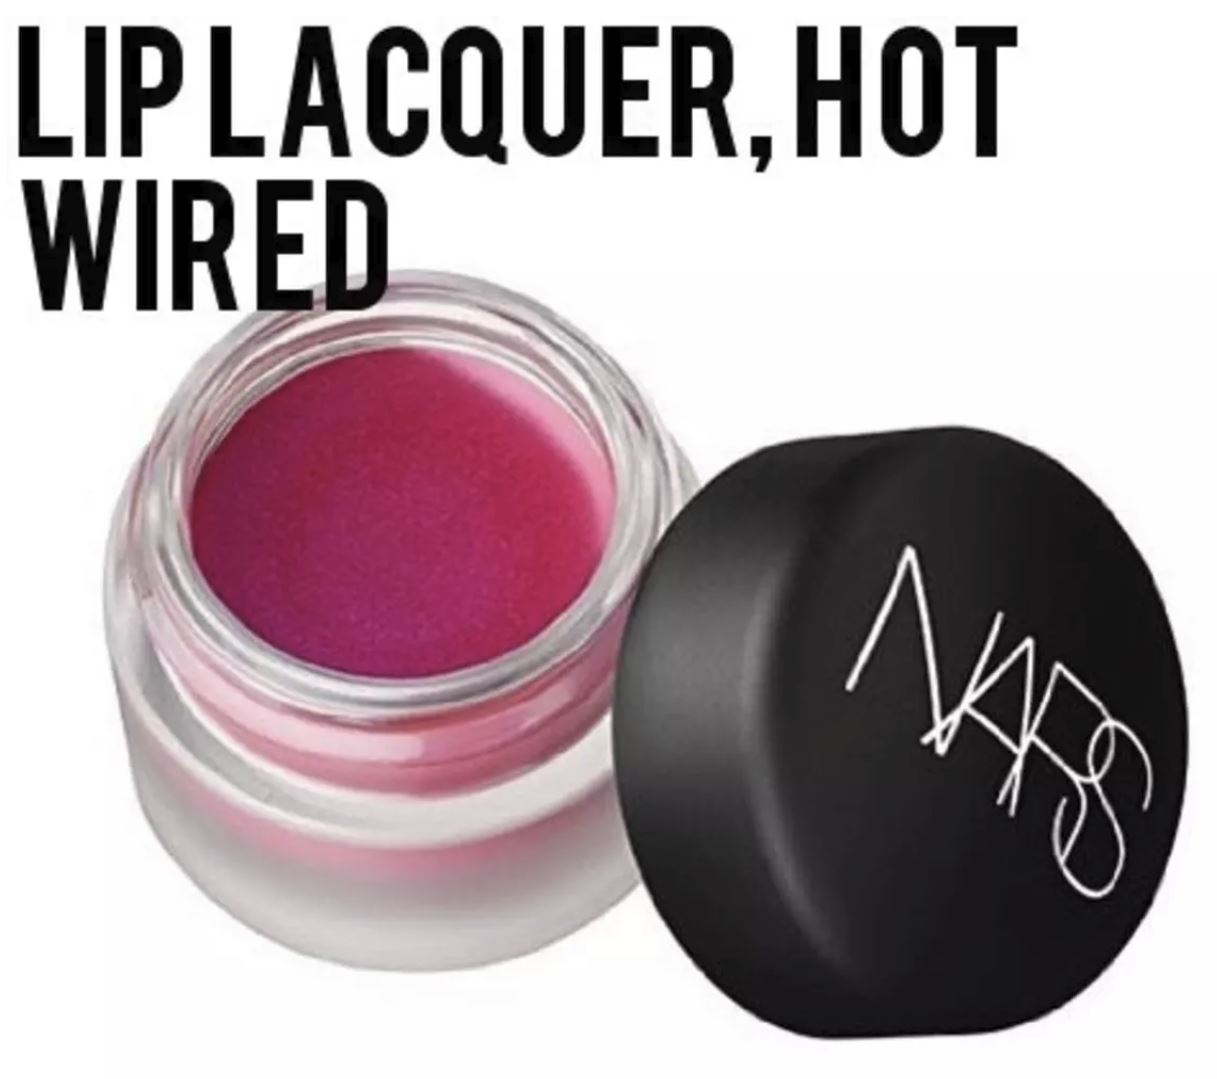 lip lacquer hot wired nars